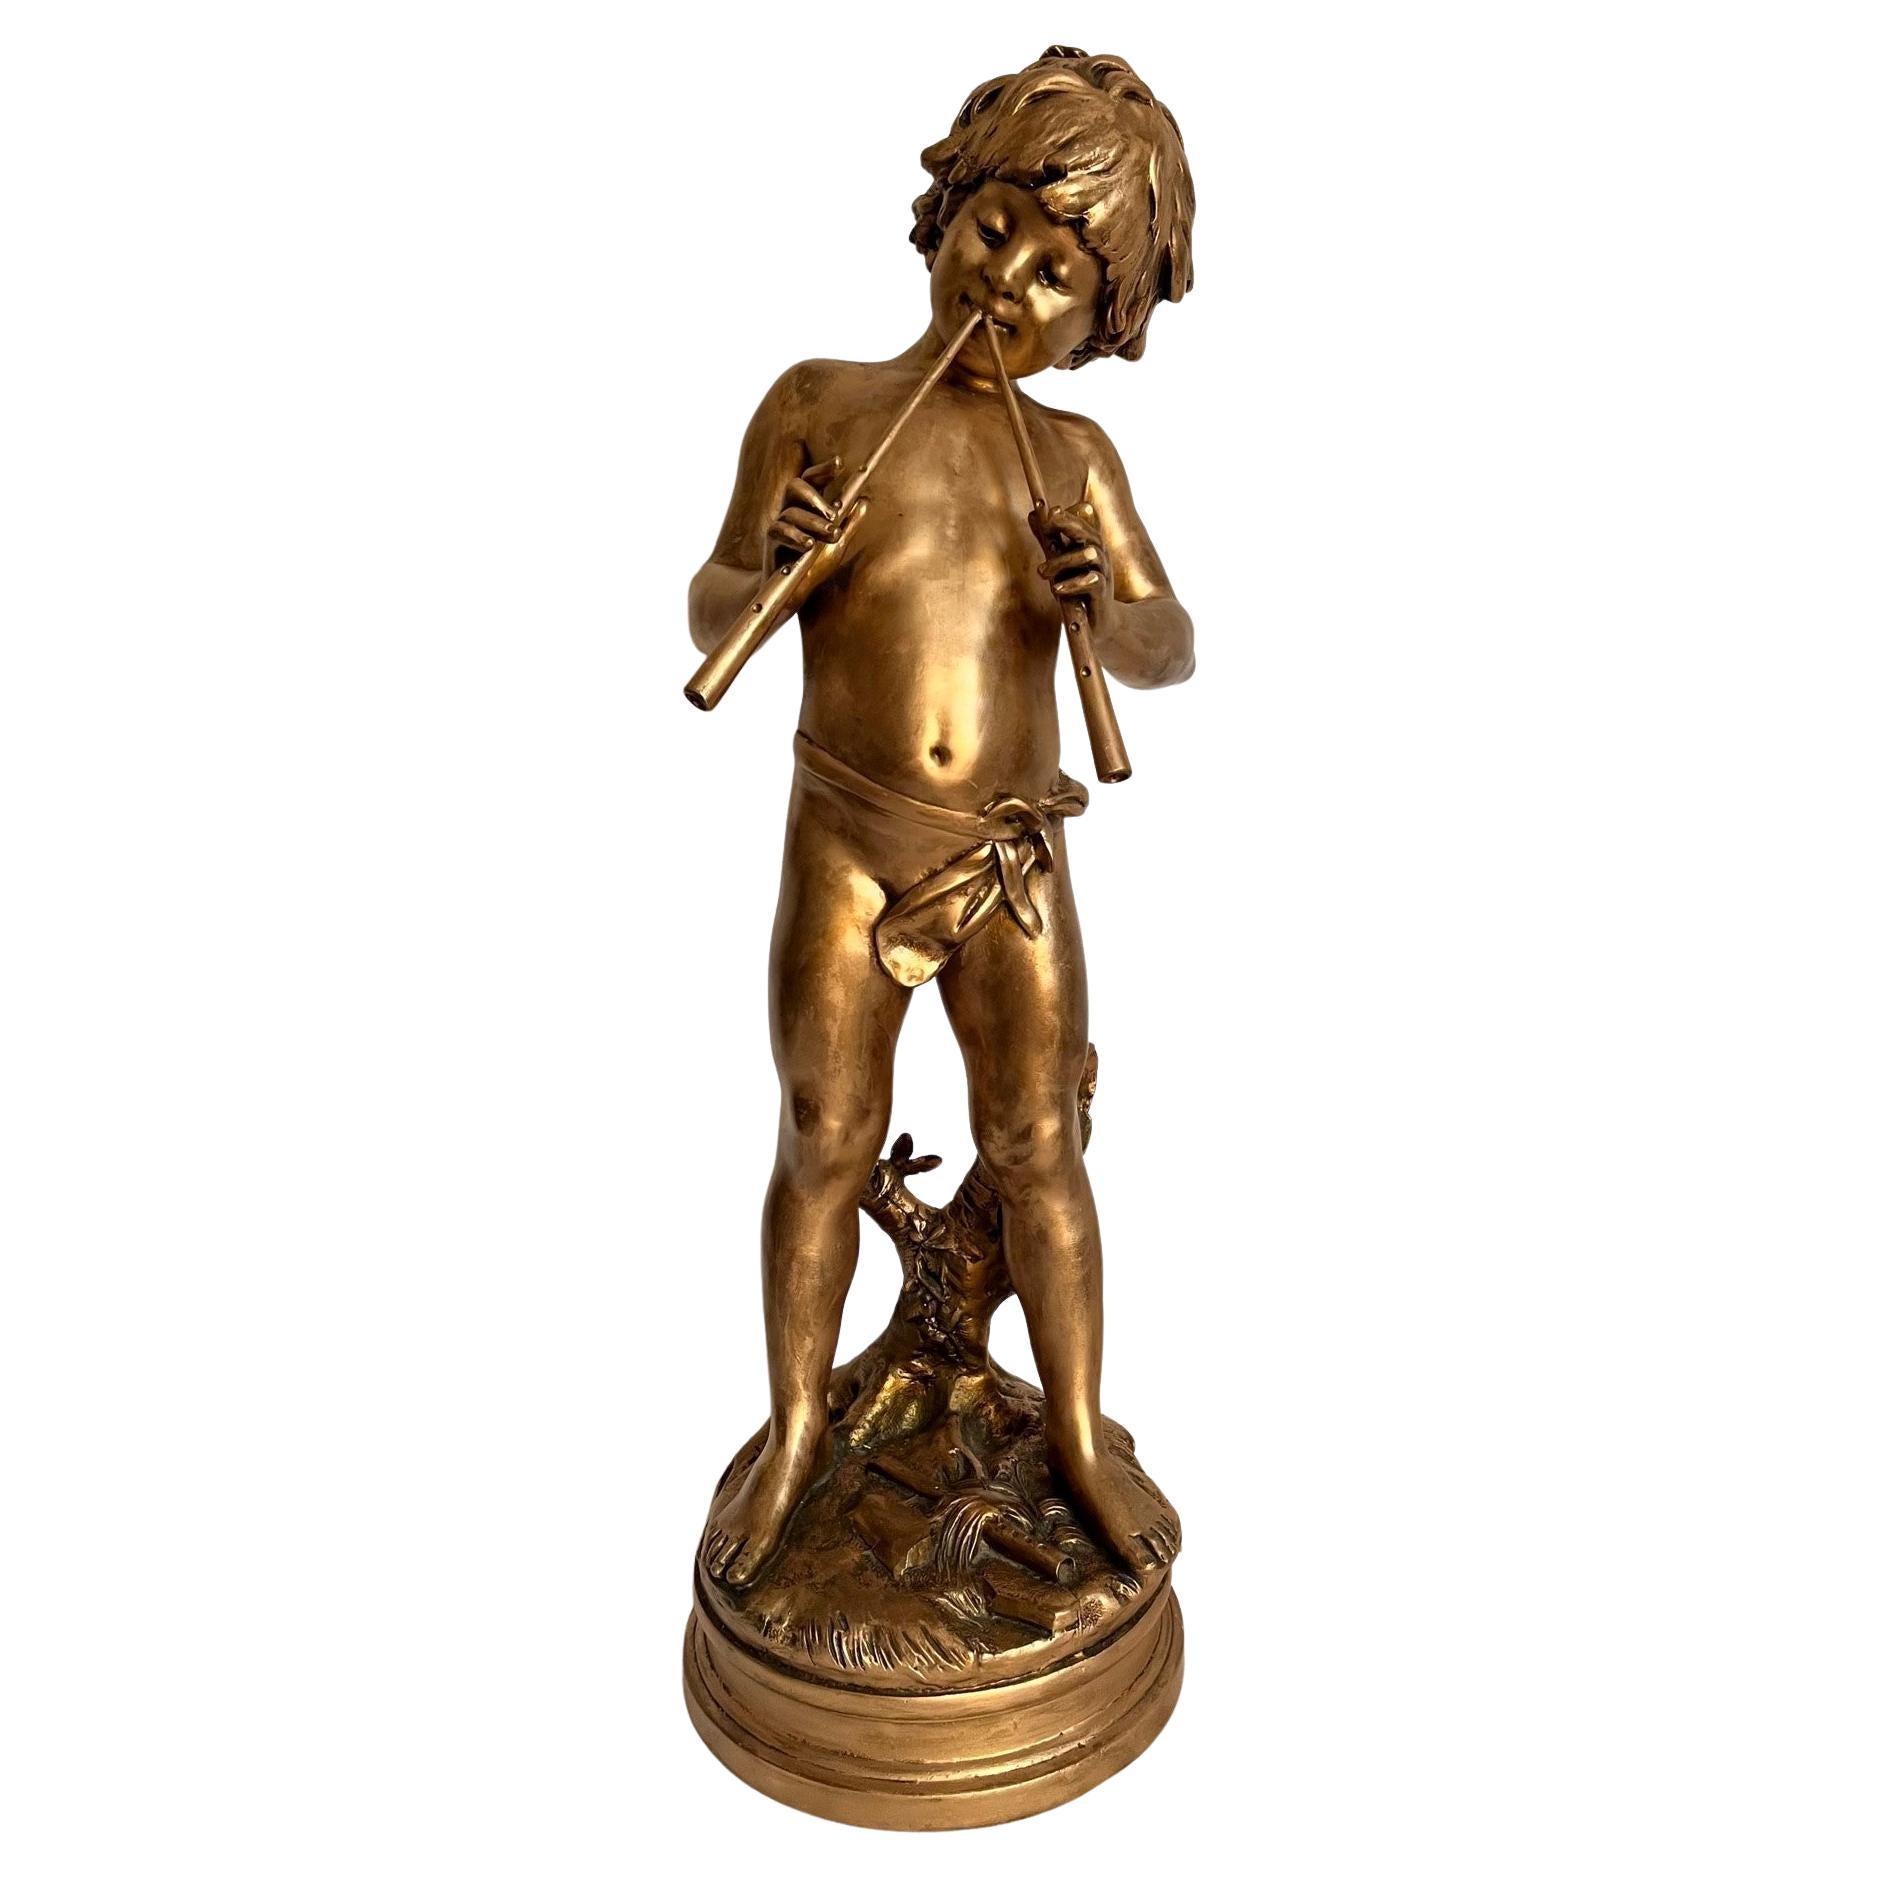 19th Century French Gilt Bronzed Sculpture “Boy with Flute”, Signed Aug. Moreau.

Large sculpture of a young boy with an aulos (double flute), created by French artist Auguste Moreau (1834-1917). It features an adorable, mythical pan of ancient